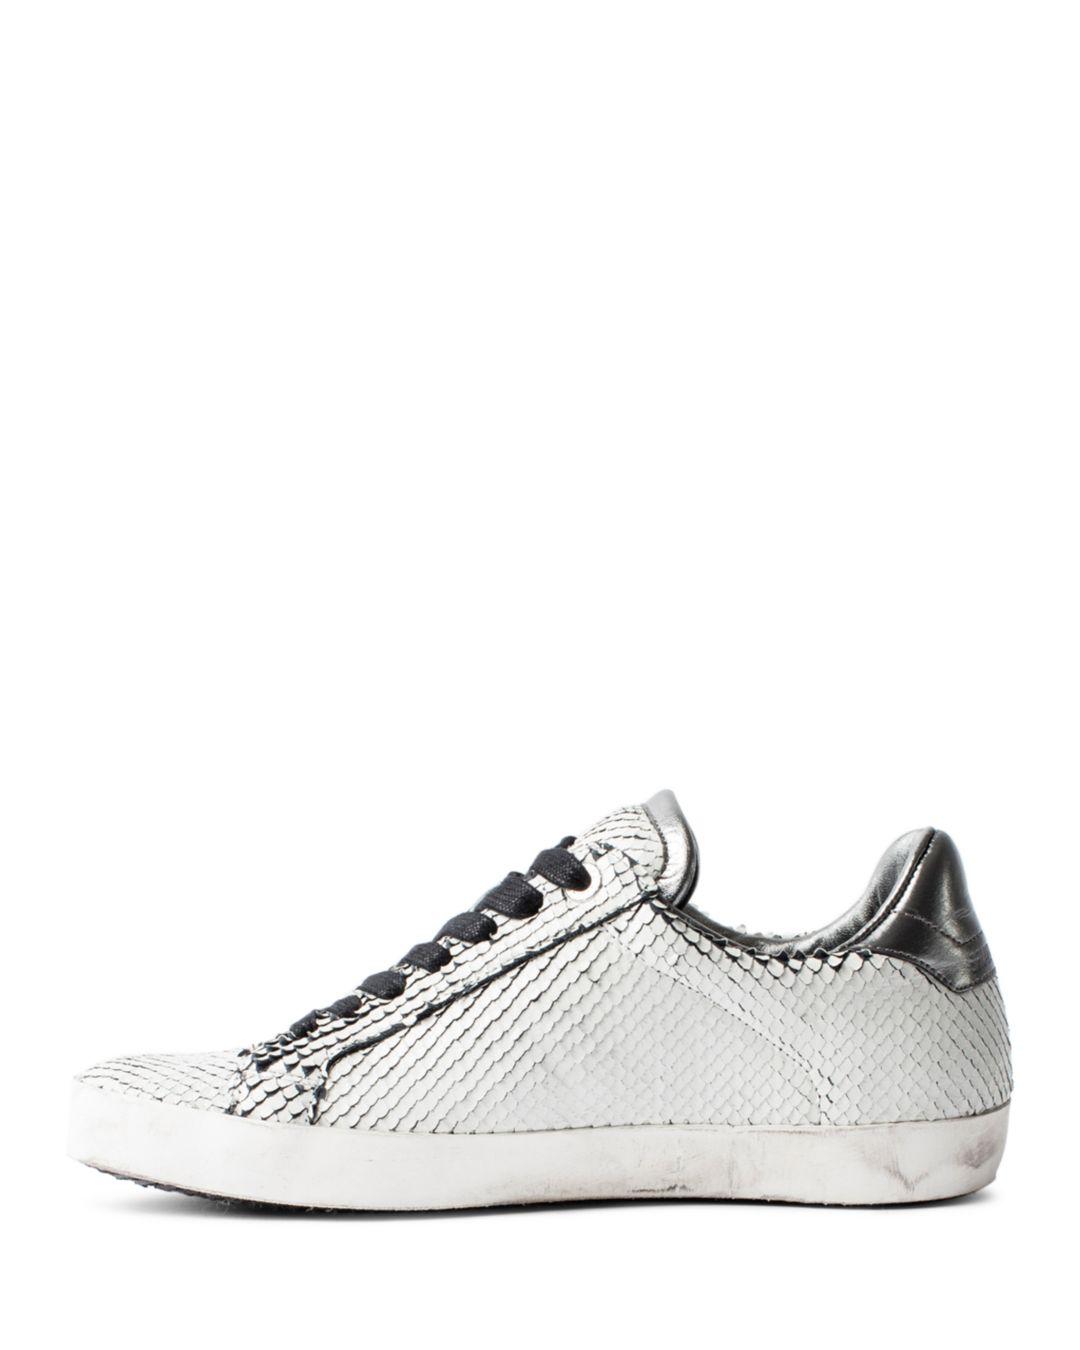 Zadig & Voltaire Zadig Neo Keith Flash Sneakers in White - Lyst